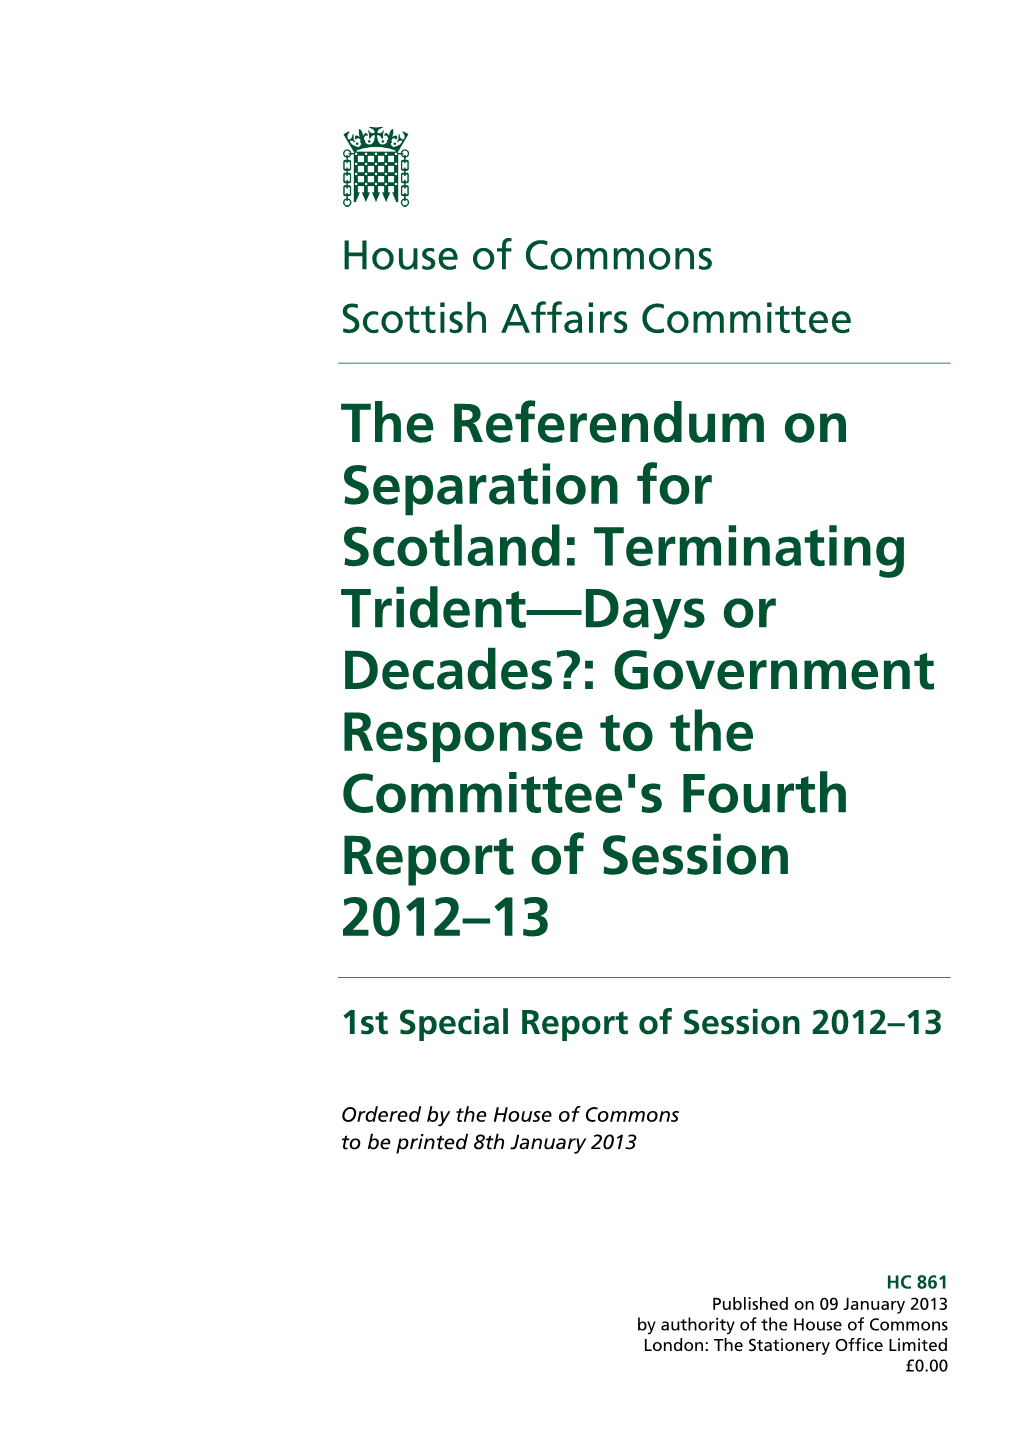 The Referendum on Separation for Scotland: Terminating Trident—Days Or Decades?: Government Response to the Committee's Fourth Report of Session 2012–13